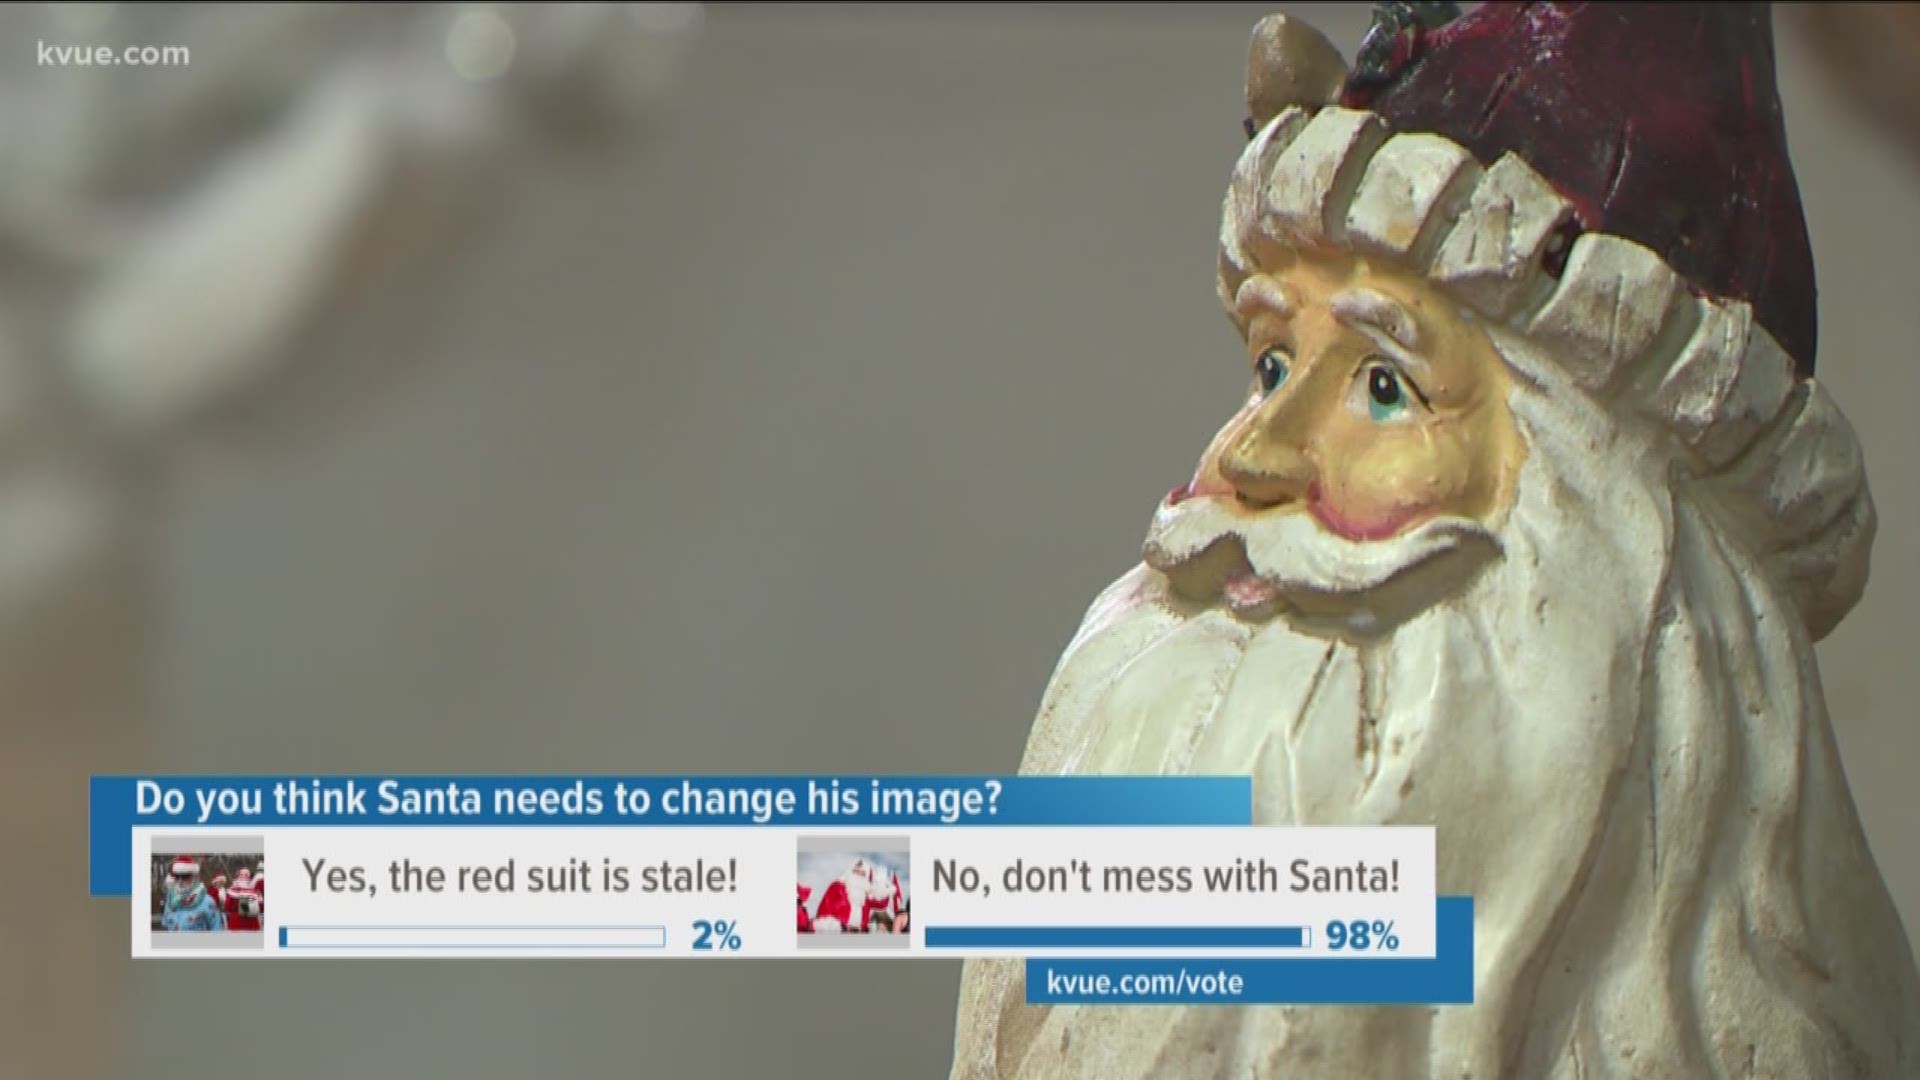 According to a survey, 27 percent of people said Santa should be re-branded as a woman or at least gender neutral.